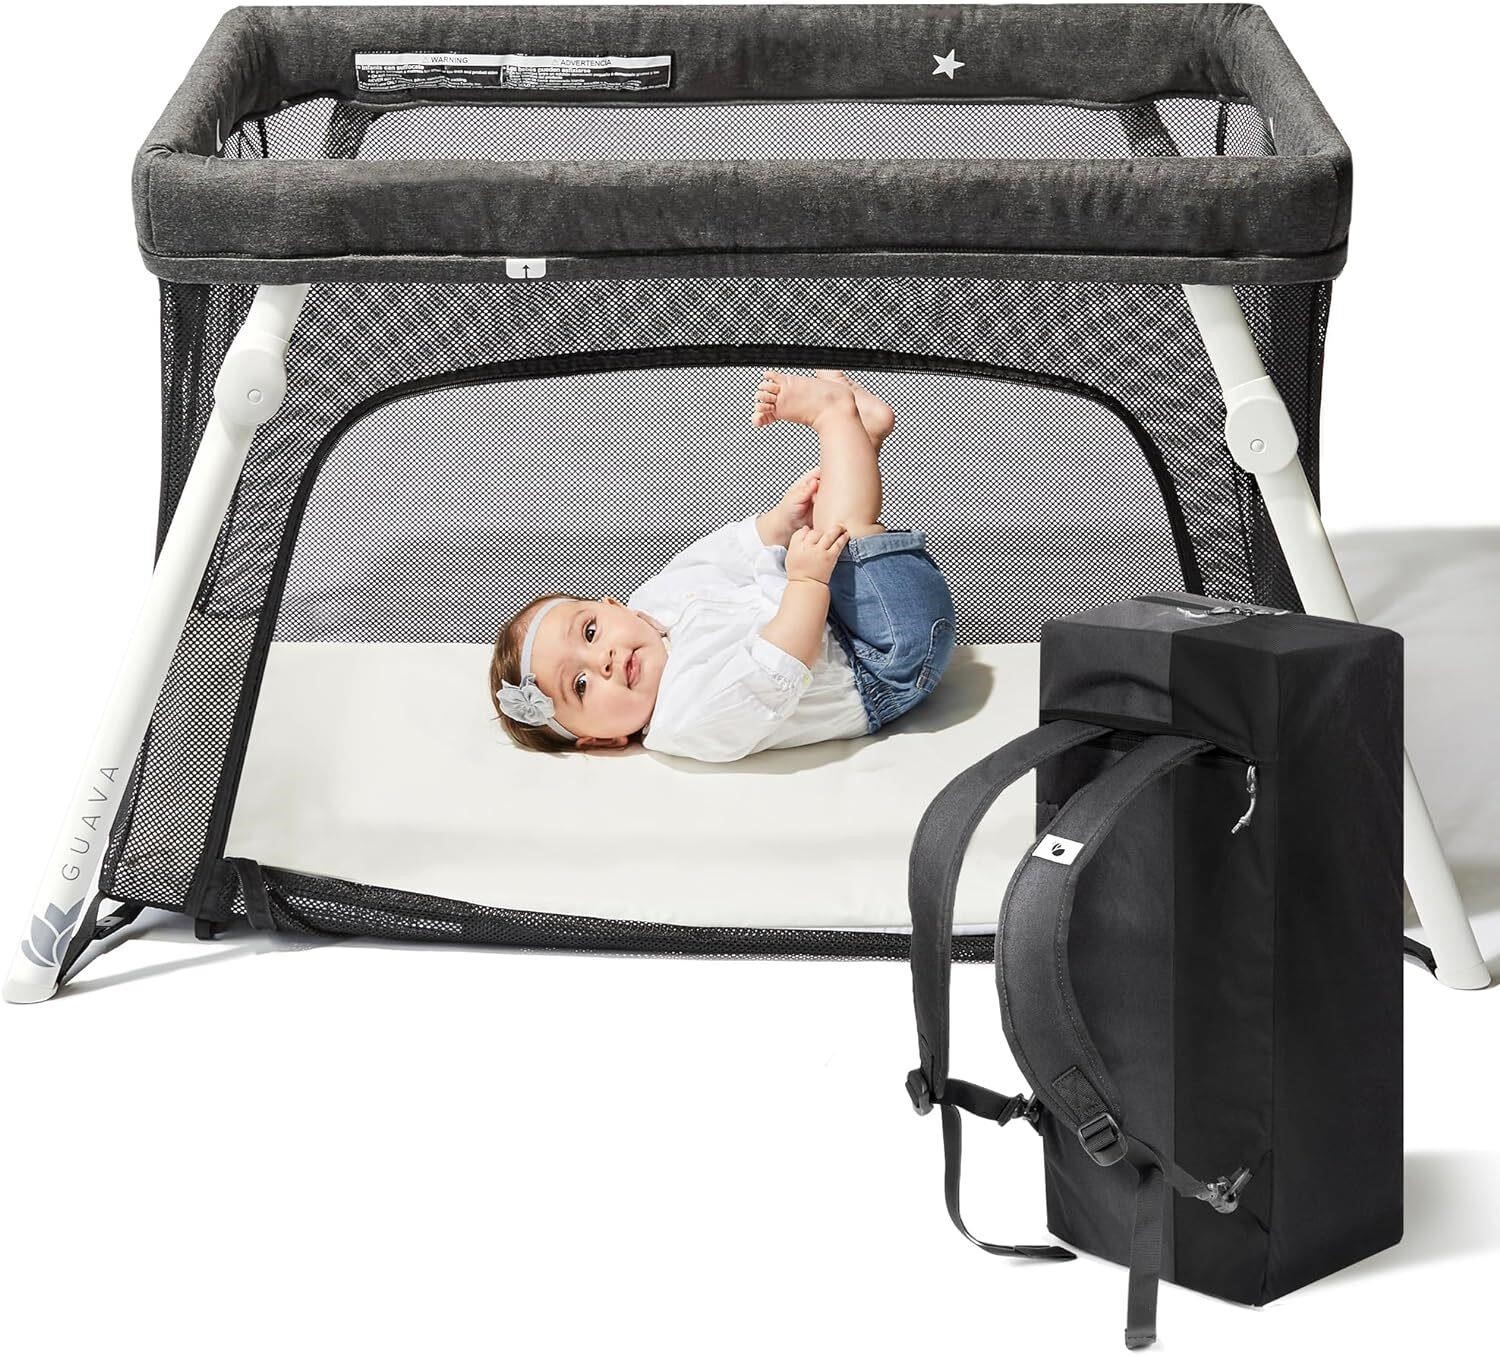 Guava Lotus Travel Crib with Backpack